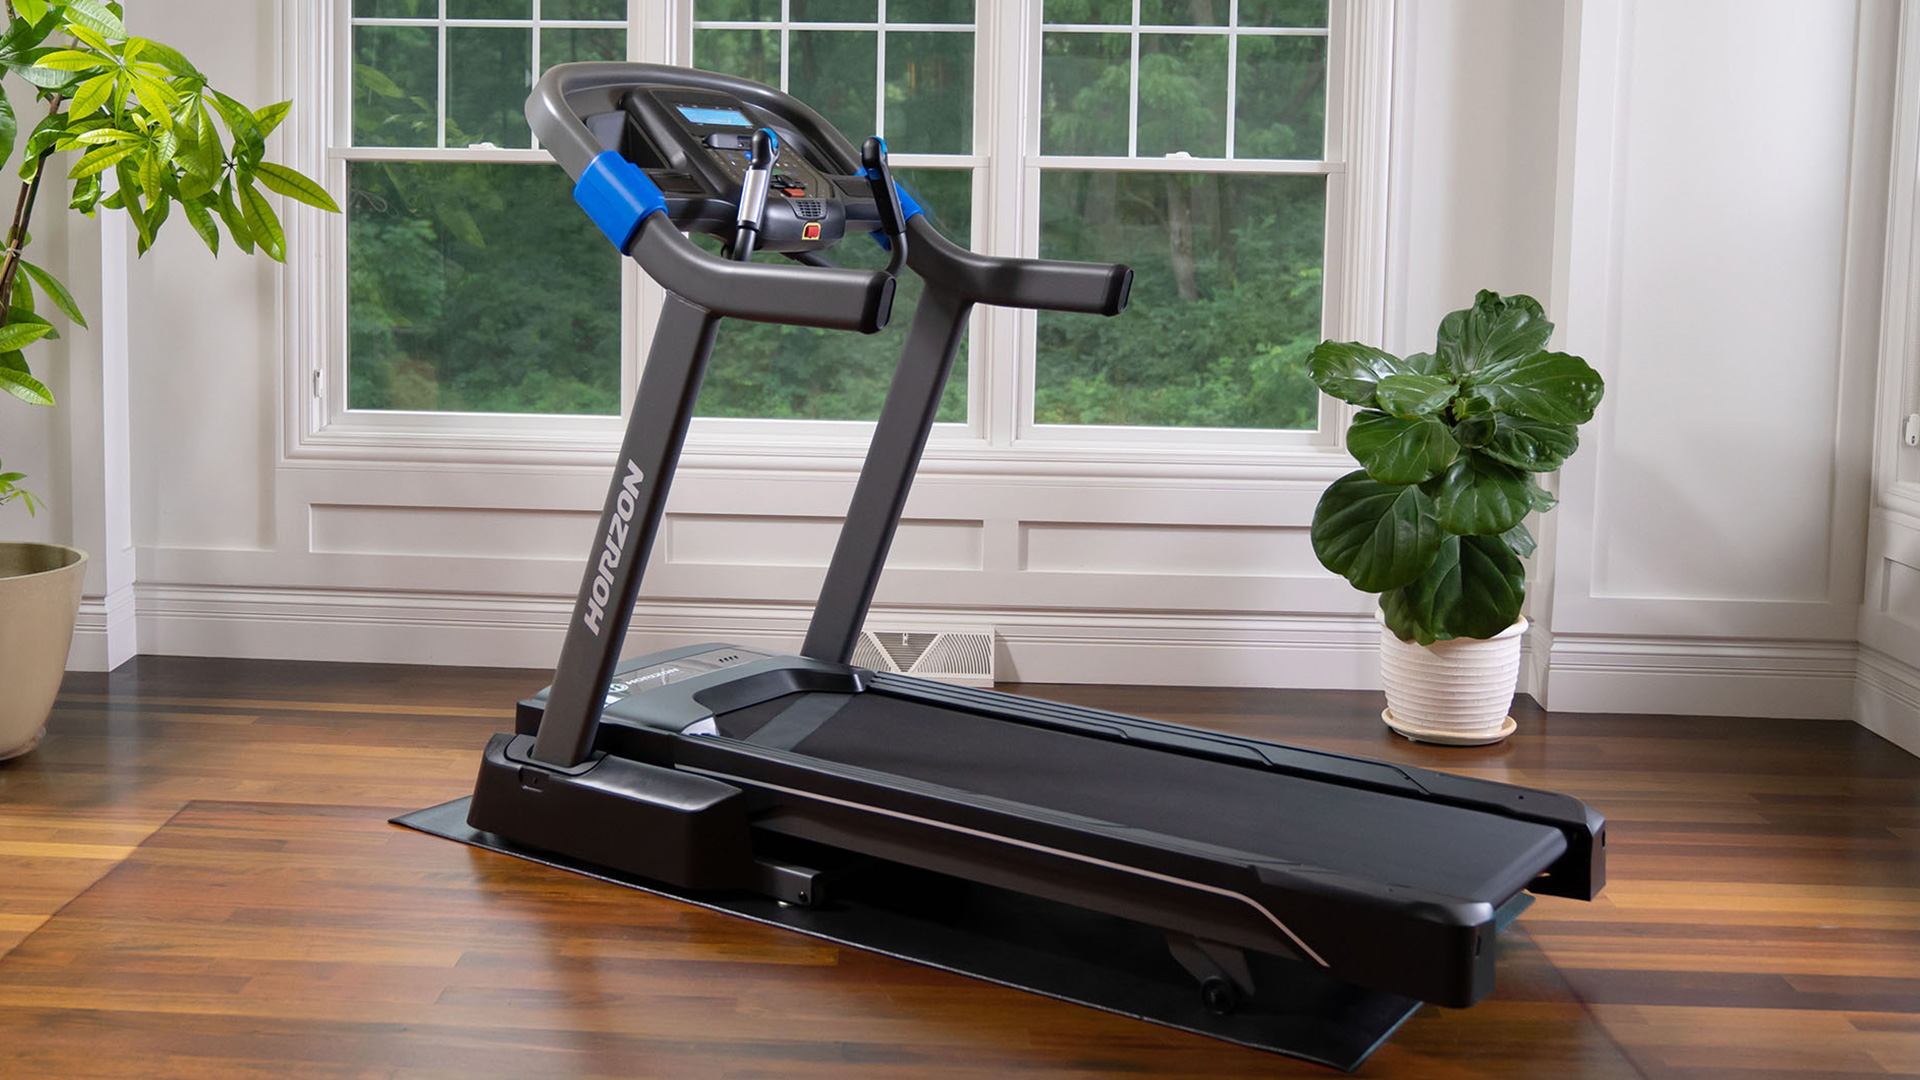 Treadmill not in use in family room